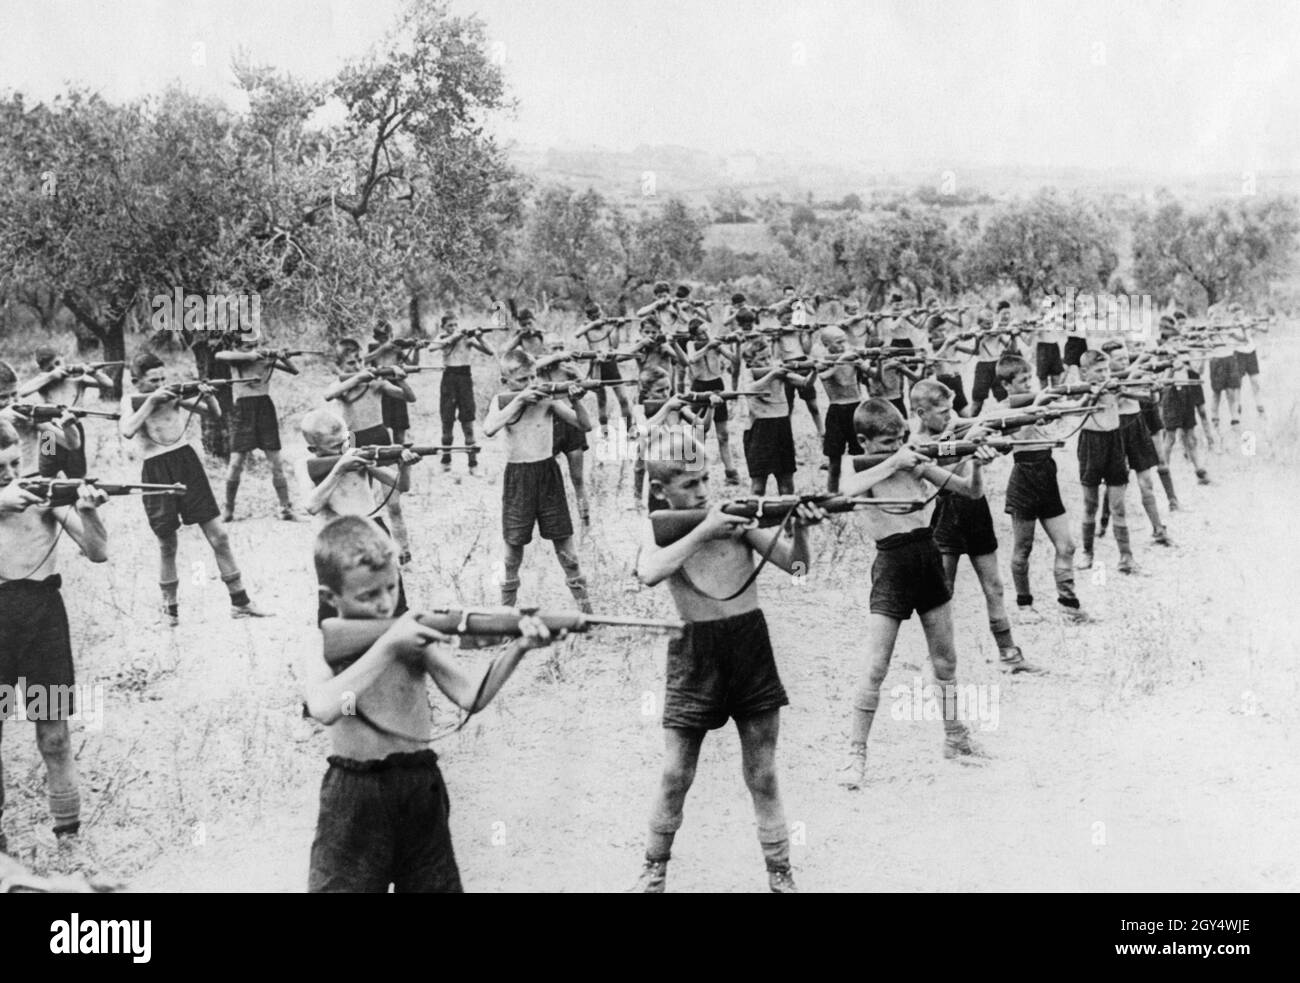 At a camp in the summer of 1934, boys belonging to the fascist youth organization Opera Nazionale Balilla practice using a rifle in target practice. The picture was taken on August 17 in Grottaferrata southeast of Rome, the site of the summer camp. In the Balilla, the young people were drilled in sports and military skills for their later entry into the army. [automated translation] Stock Photo